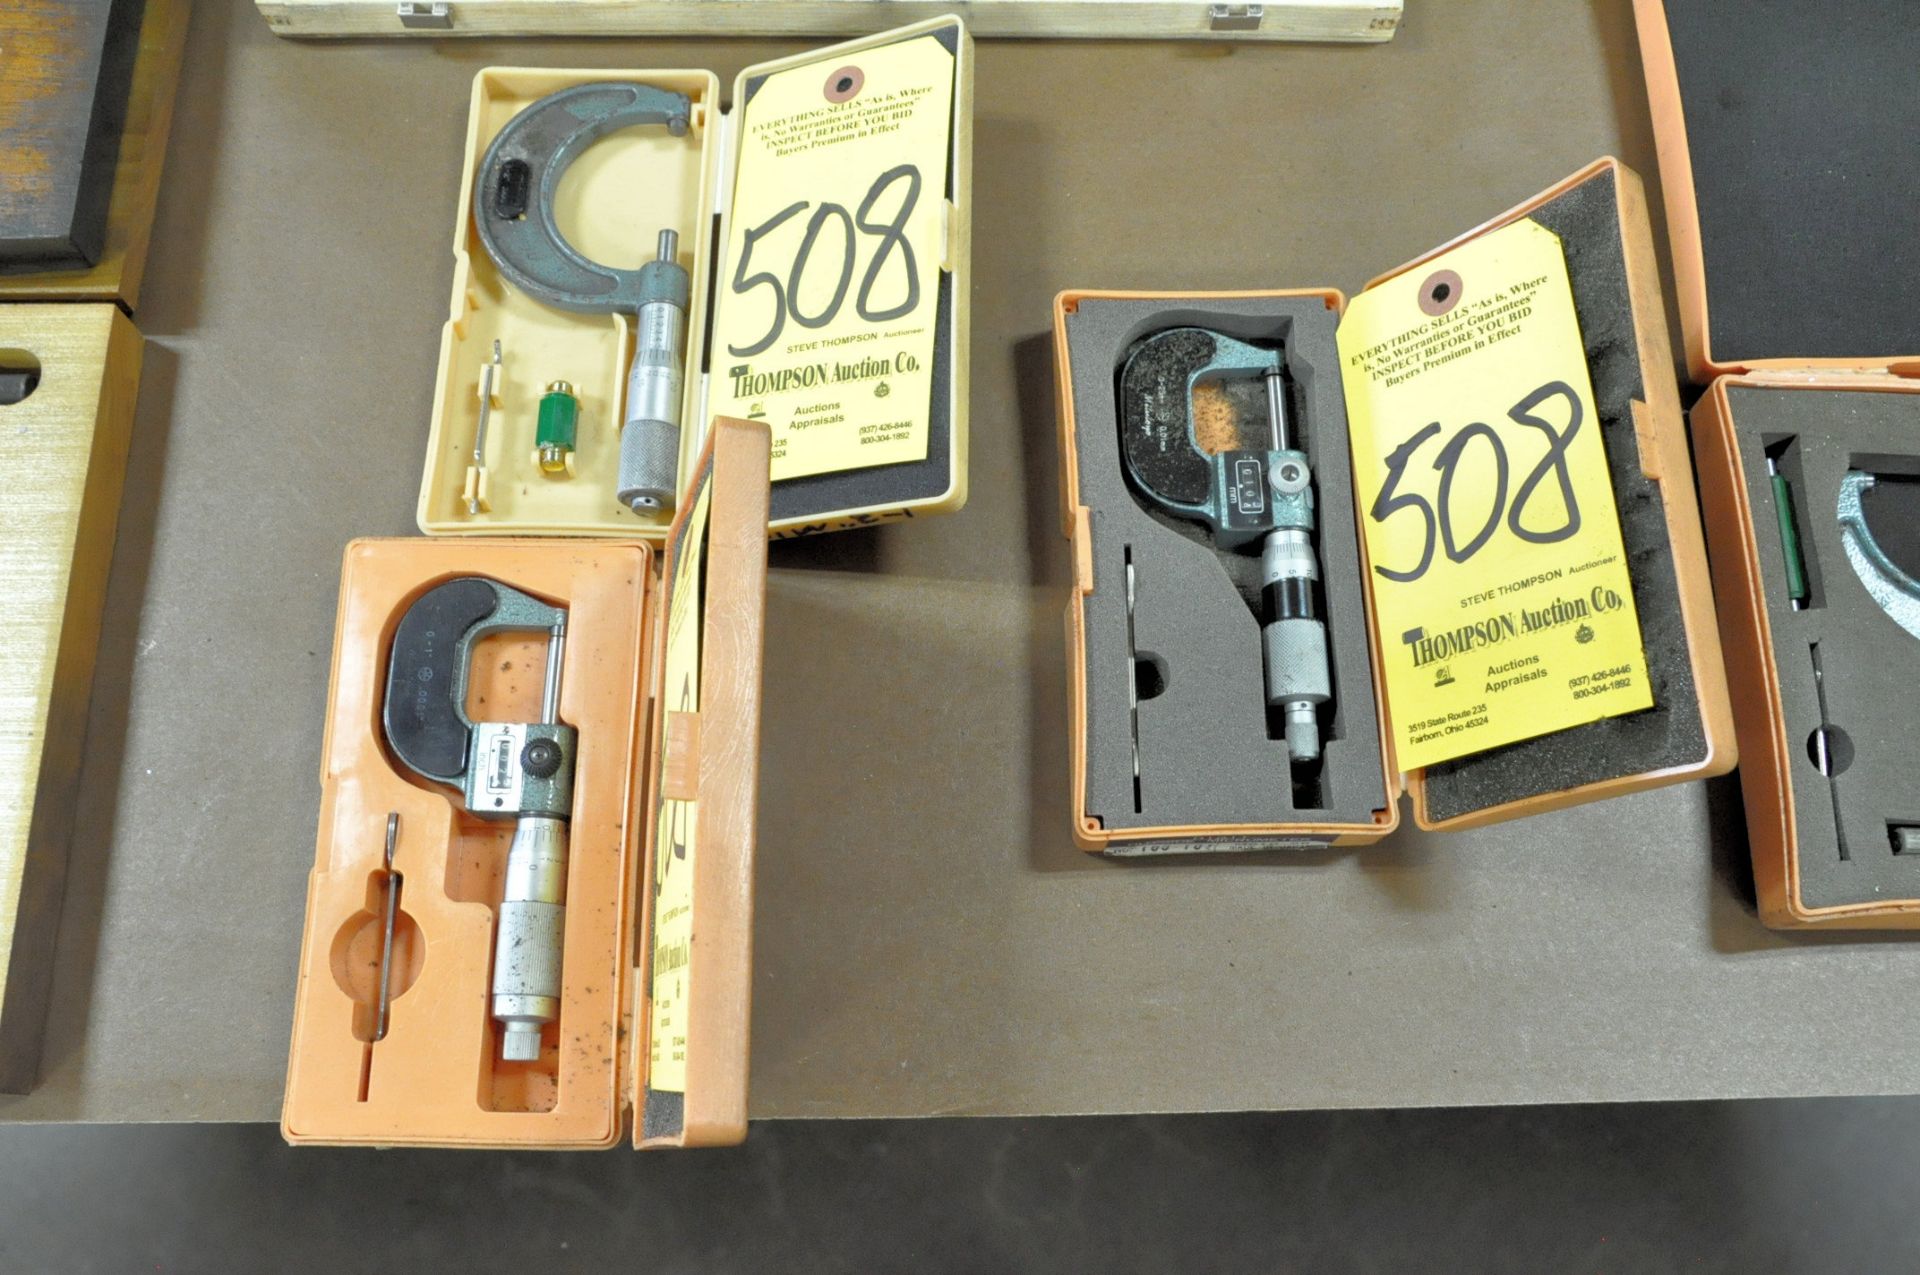 Lot-(1) Mitutoyo 0 - 25mm, (1) 0 - 1" and (1) 1" - 2" Micrometers with Cases